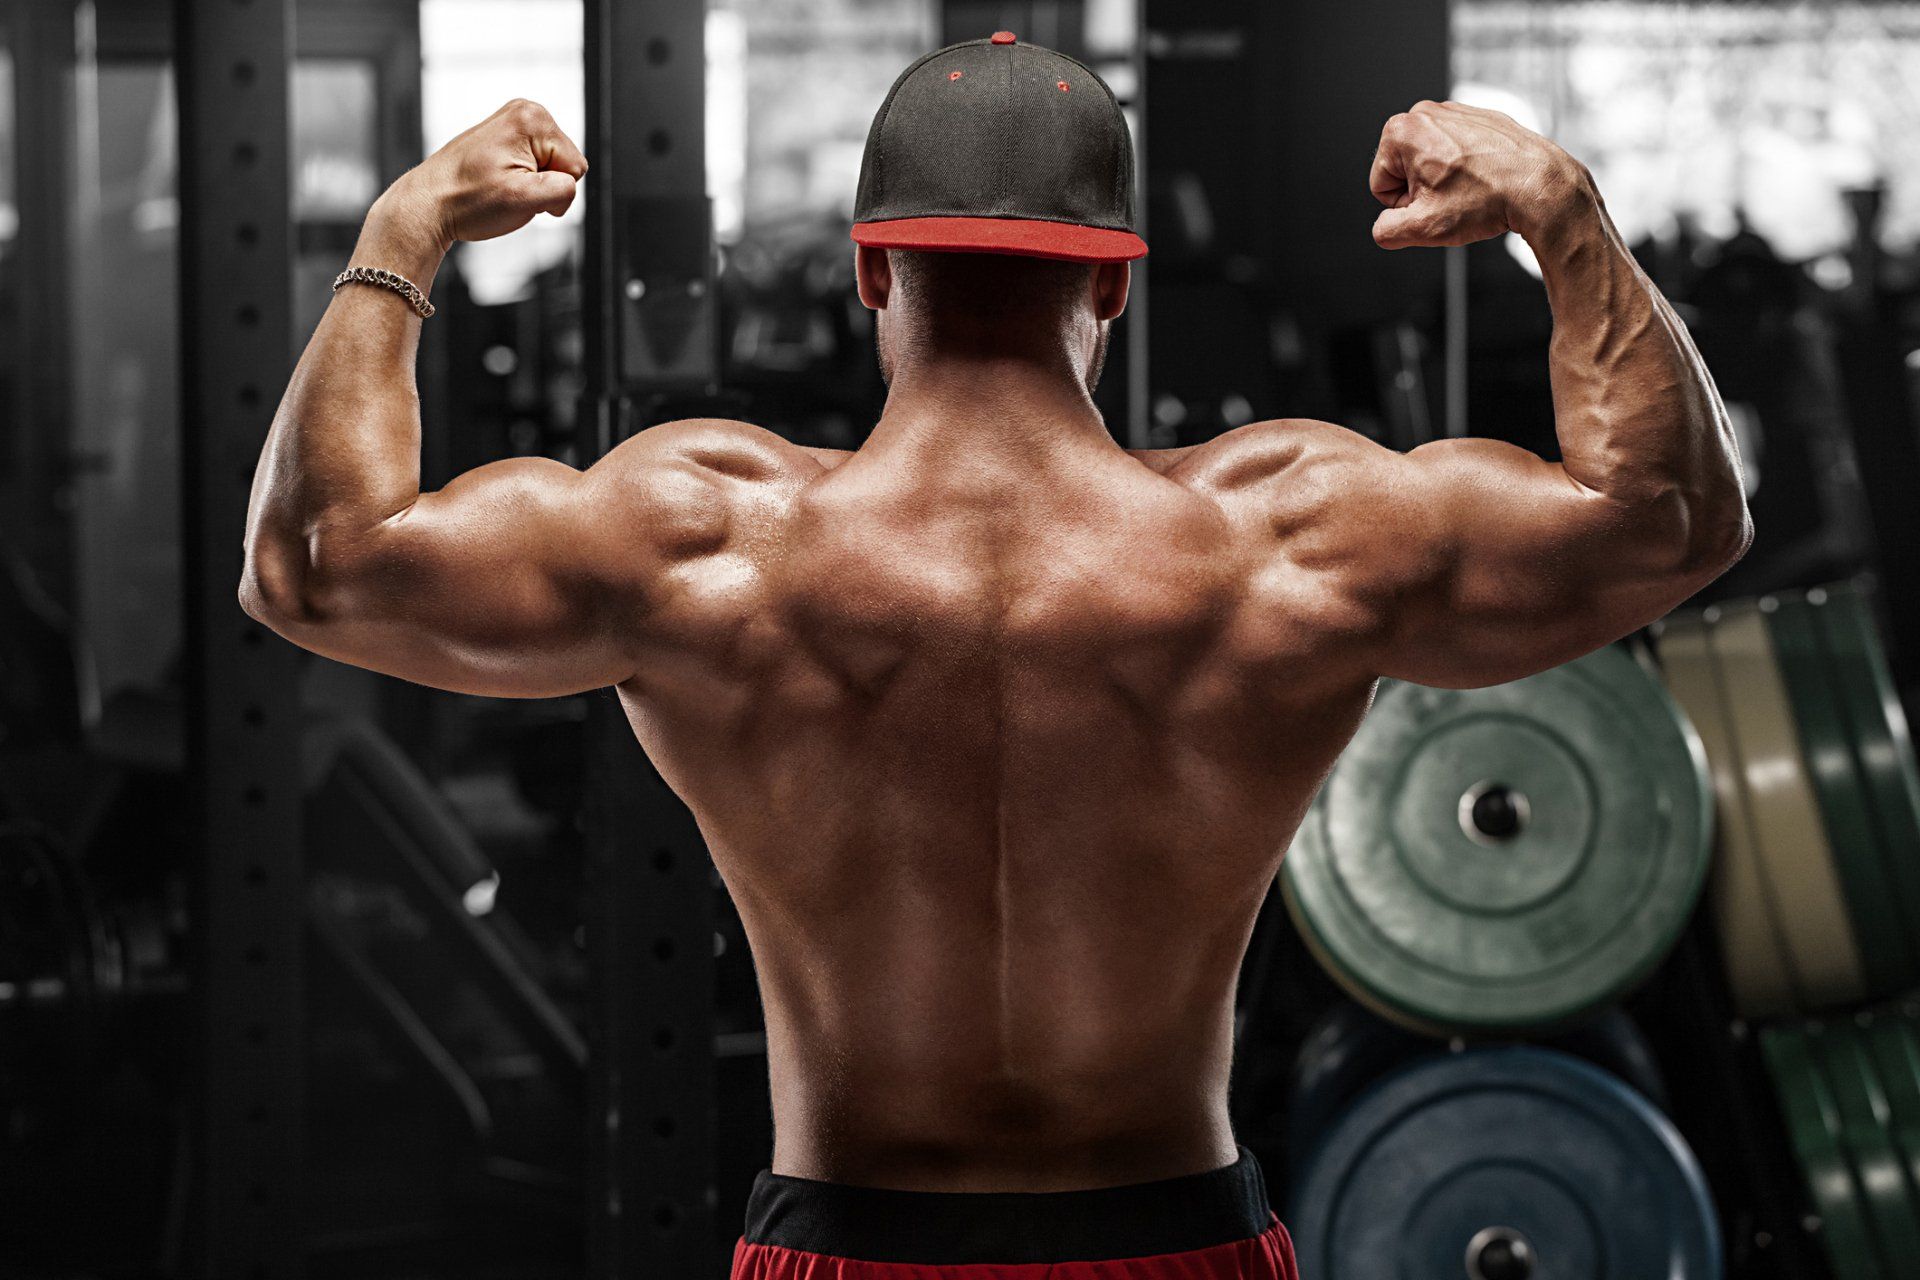 The Best Rep Range for Hypertrophy